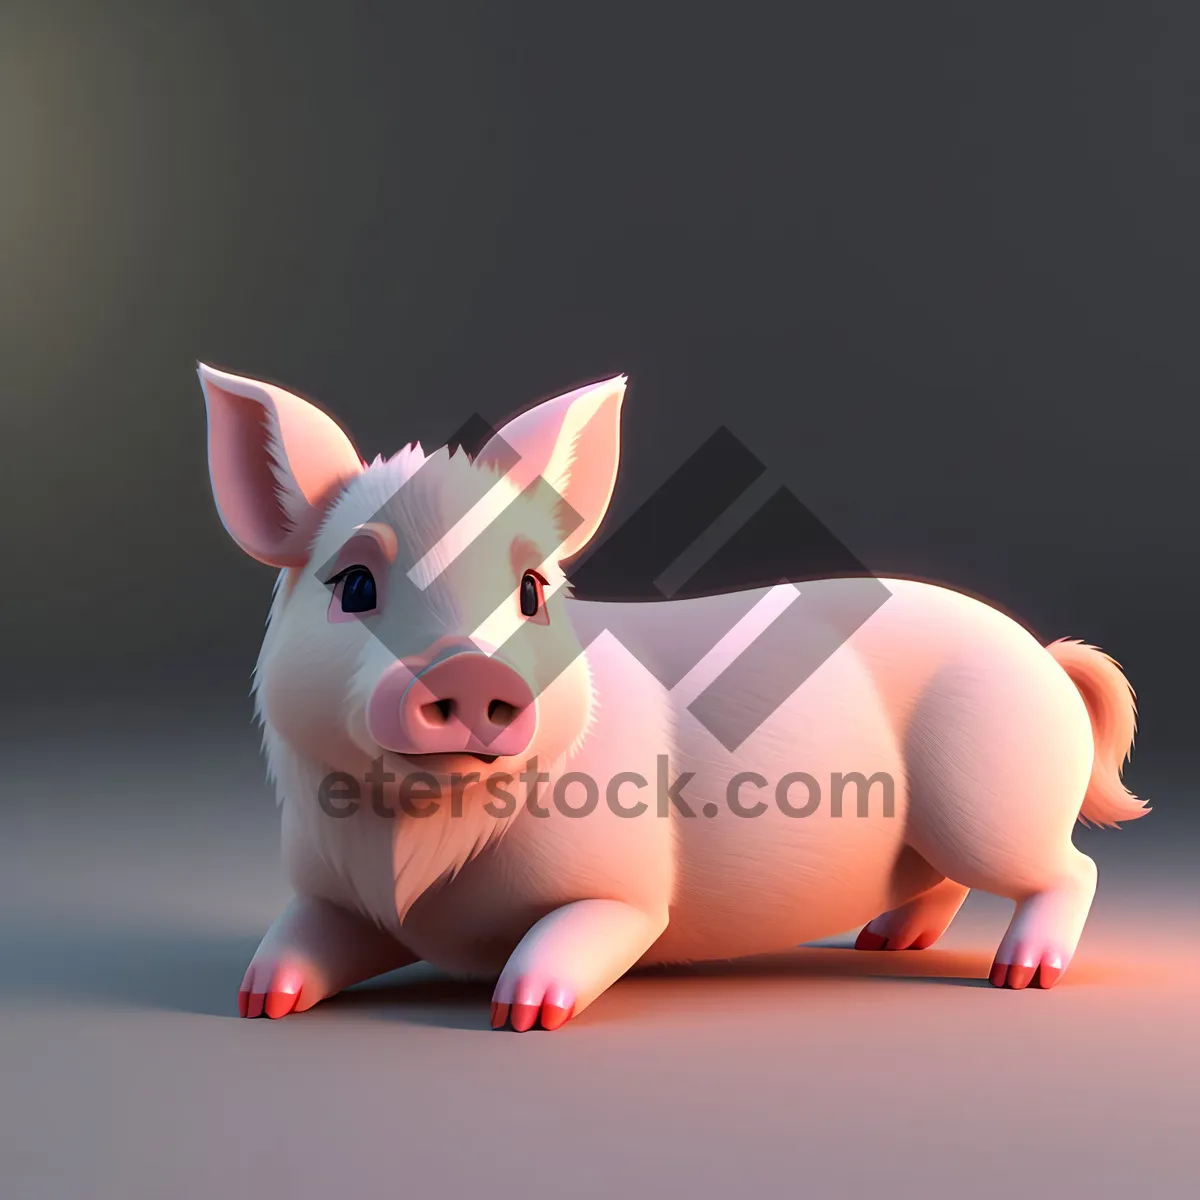 Picture of Pink Piggy Bank: Savings for Financial Wealth